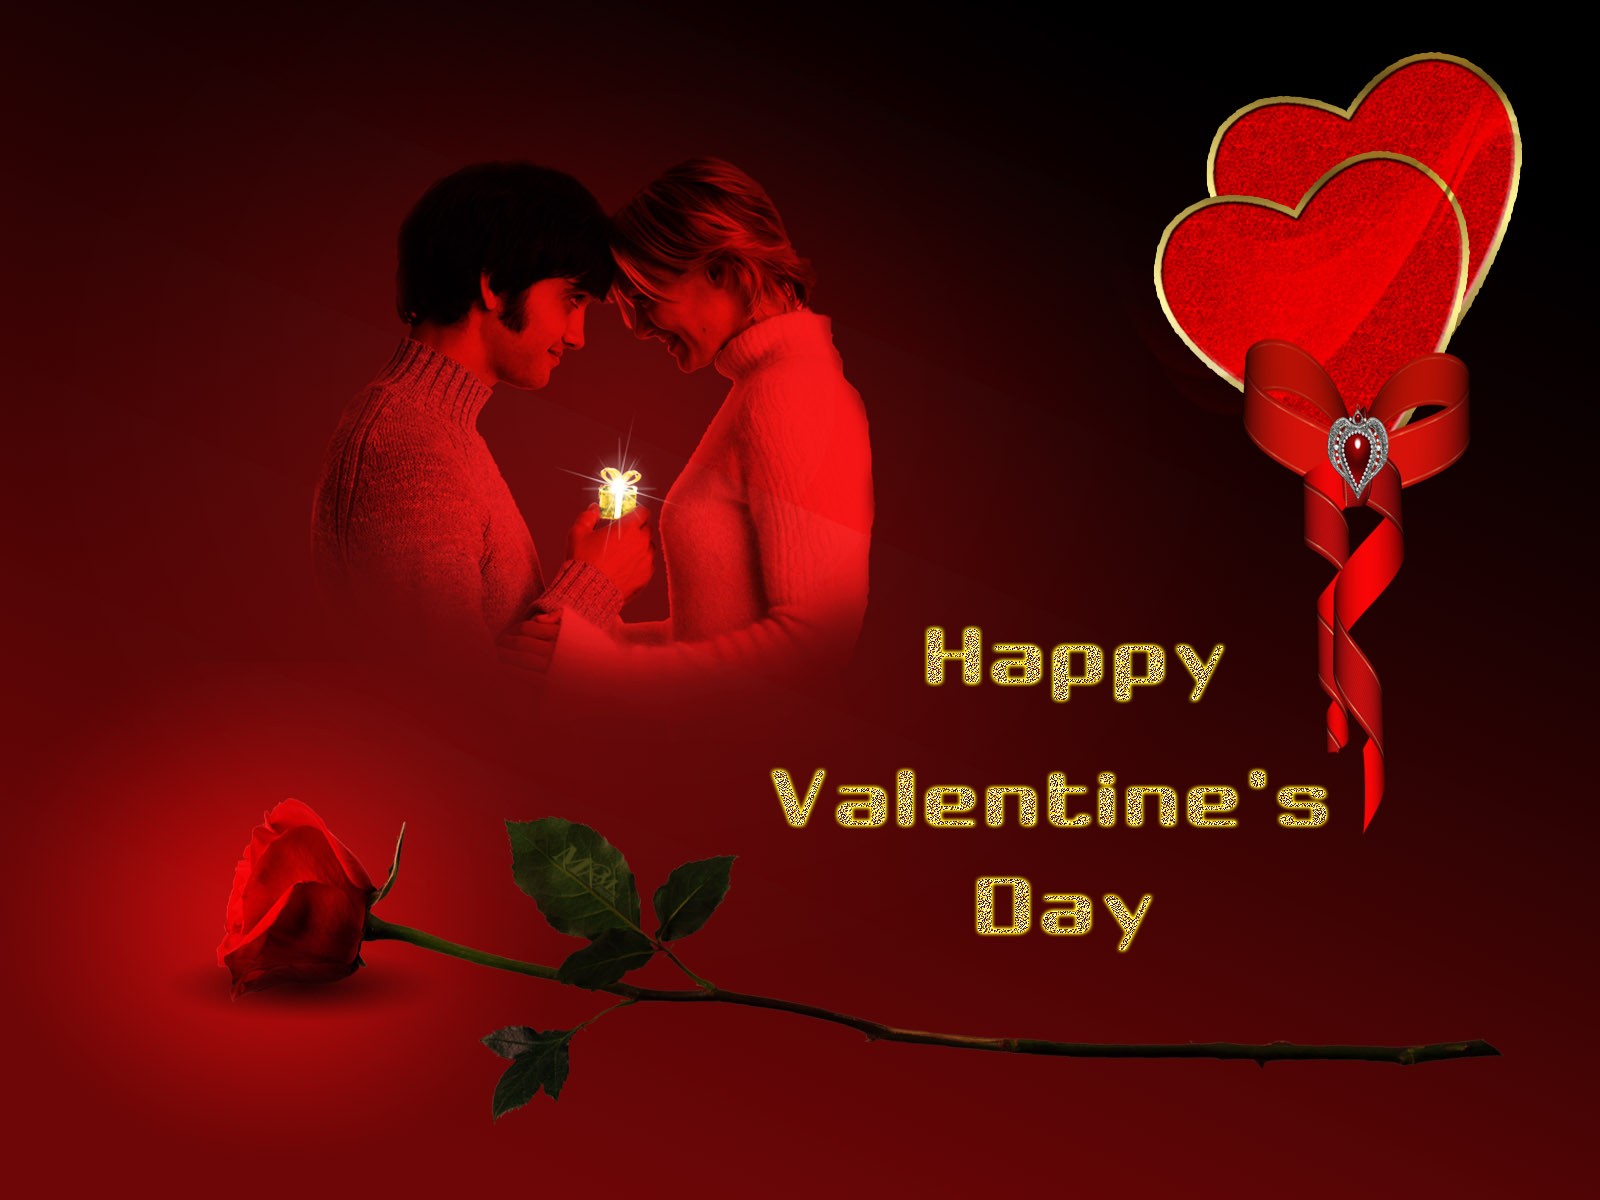 Couple in Love Happy Valentines Day Wallpaper Download